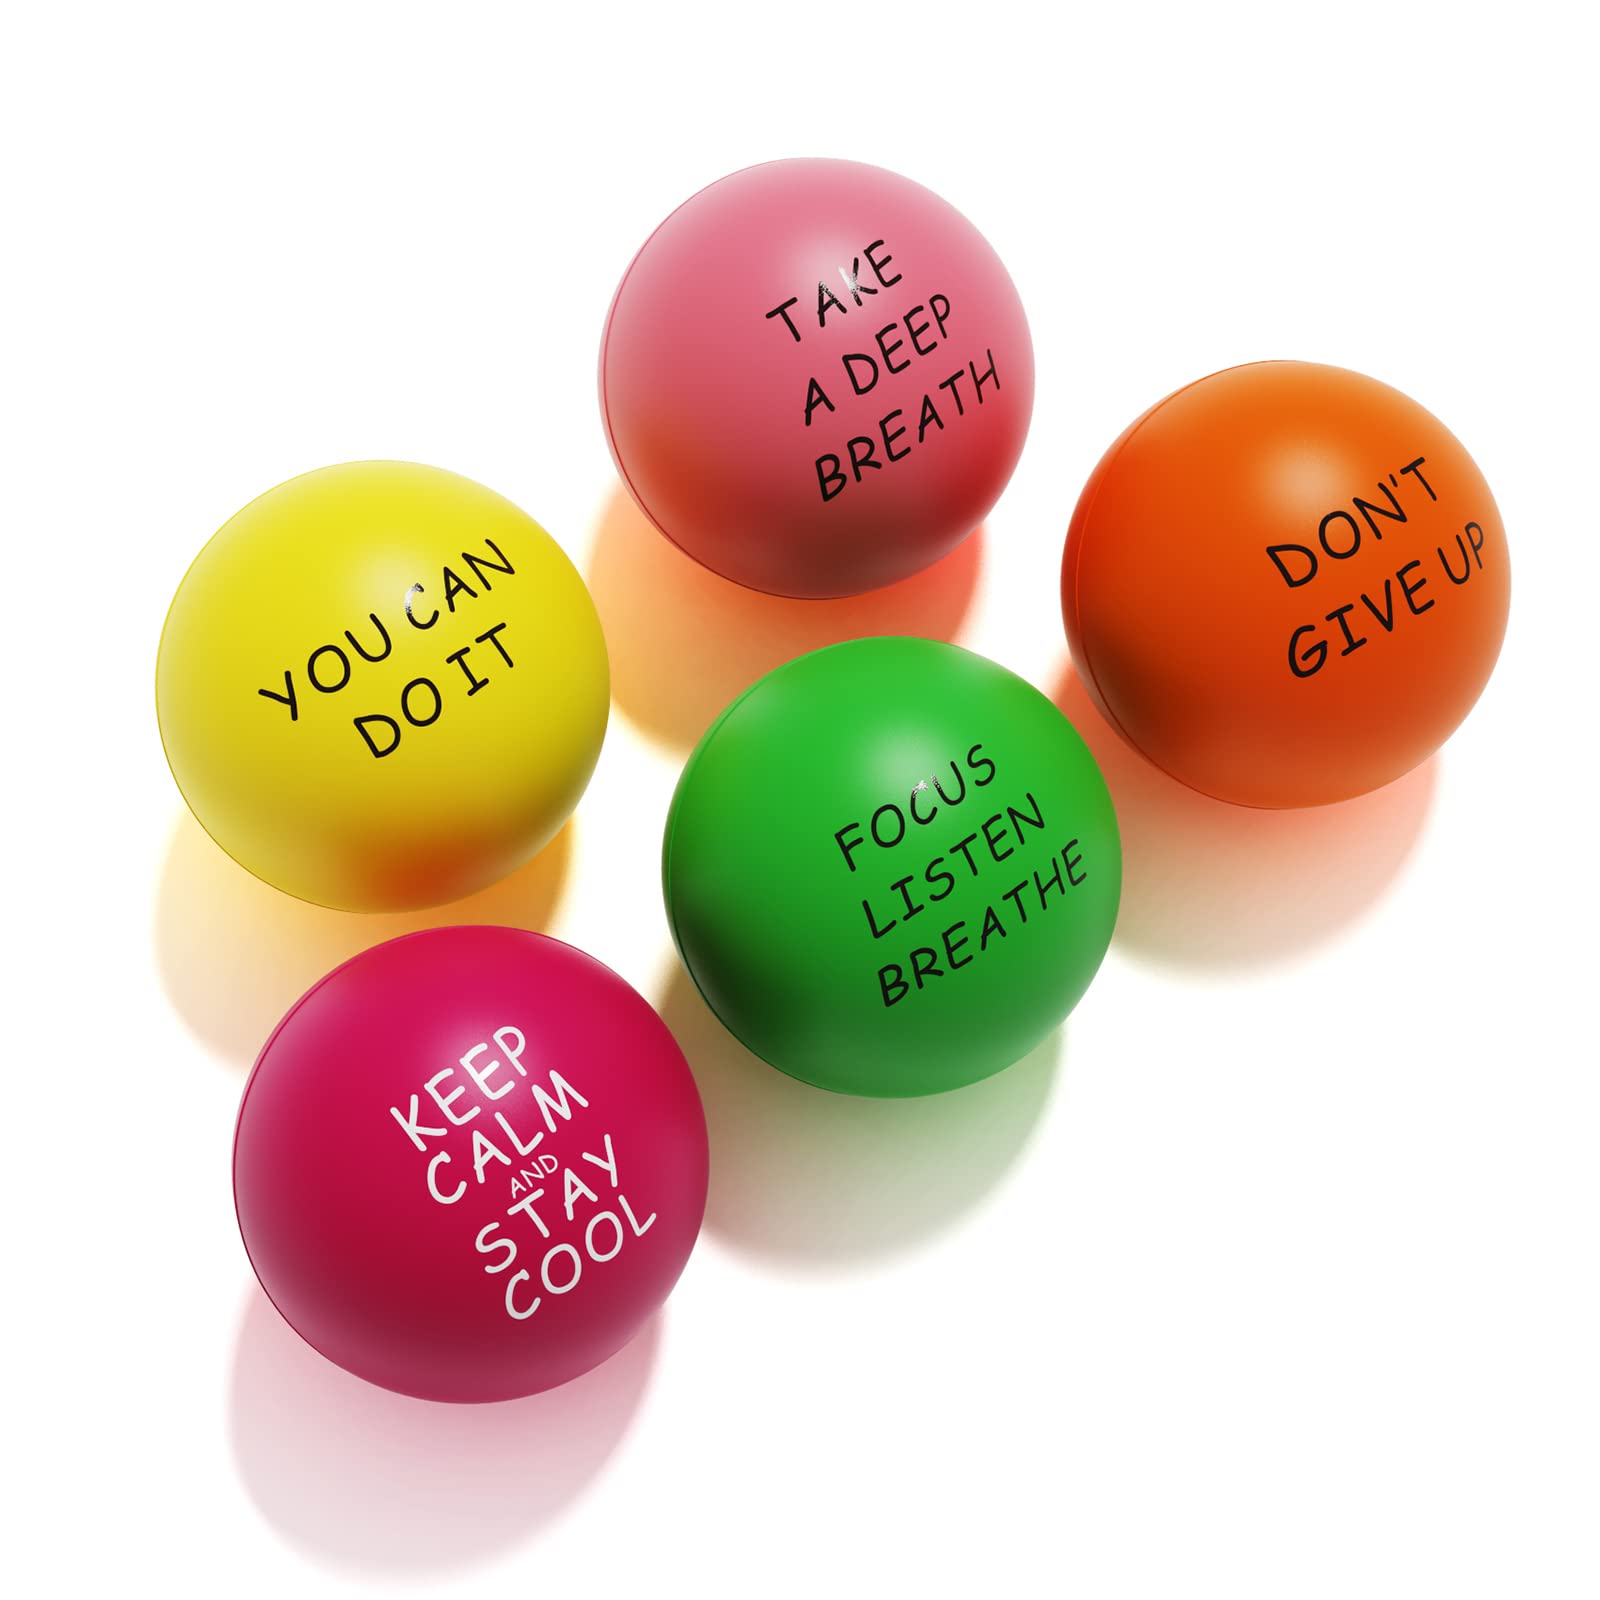 Did You Know About These Giant Nee Doh Balls: The Top 10 Surprisingly Huge Stress Balls You